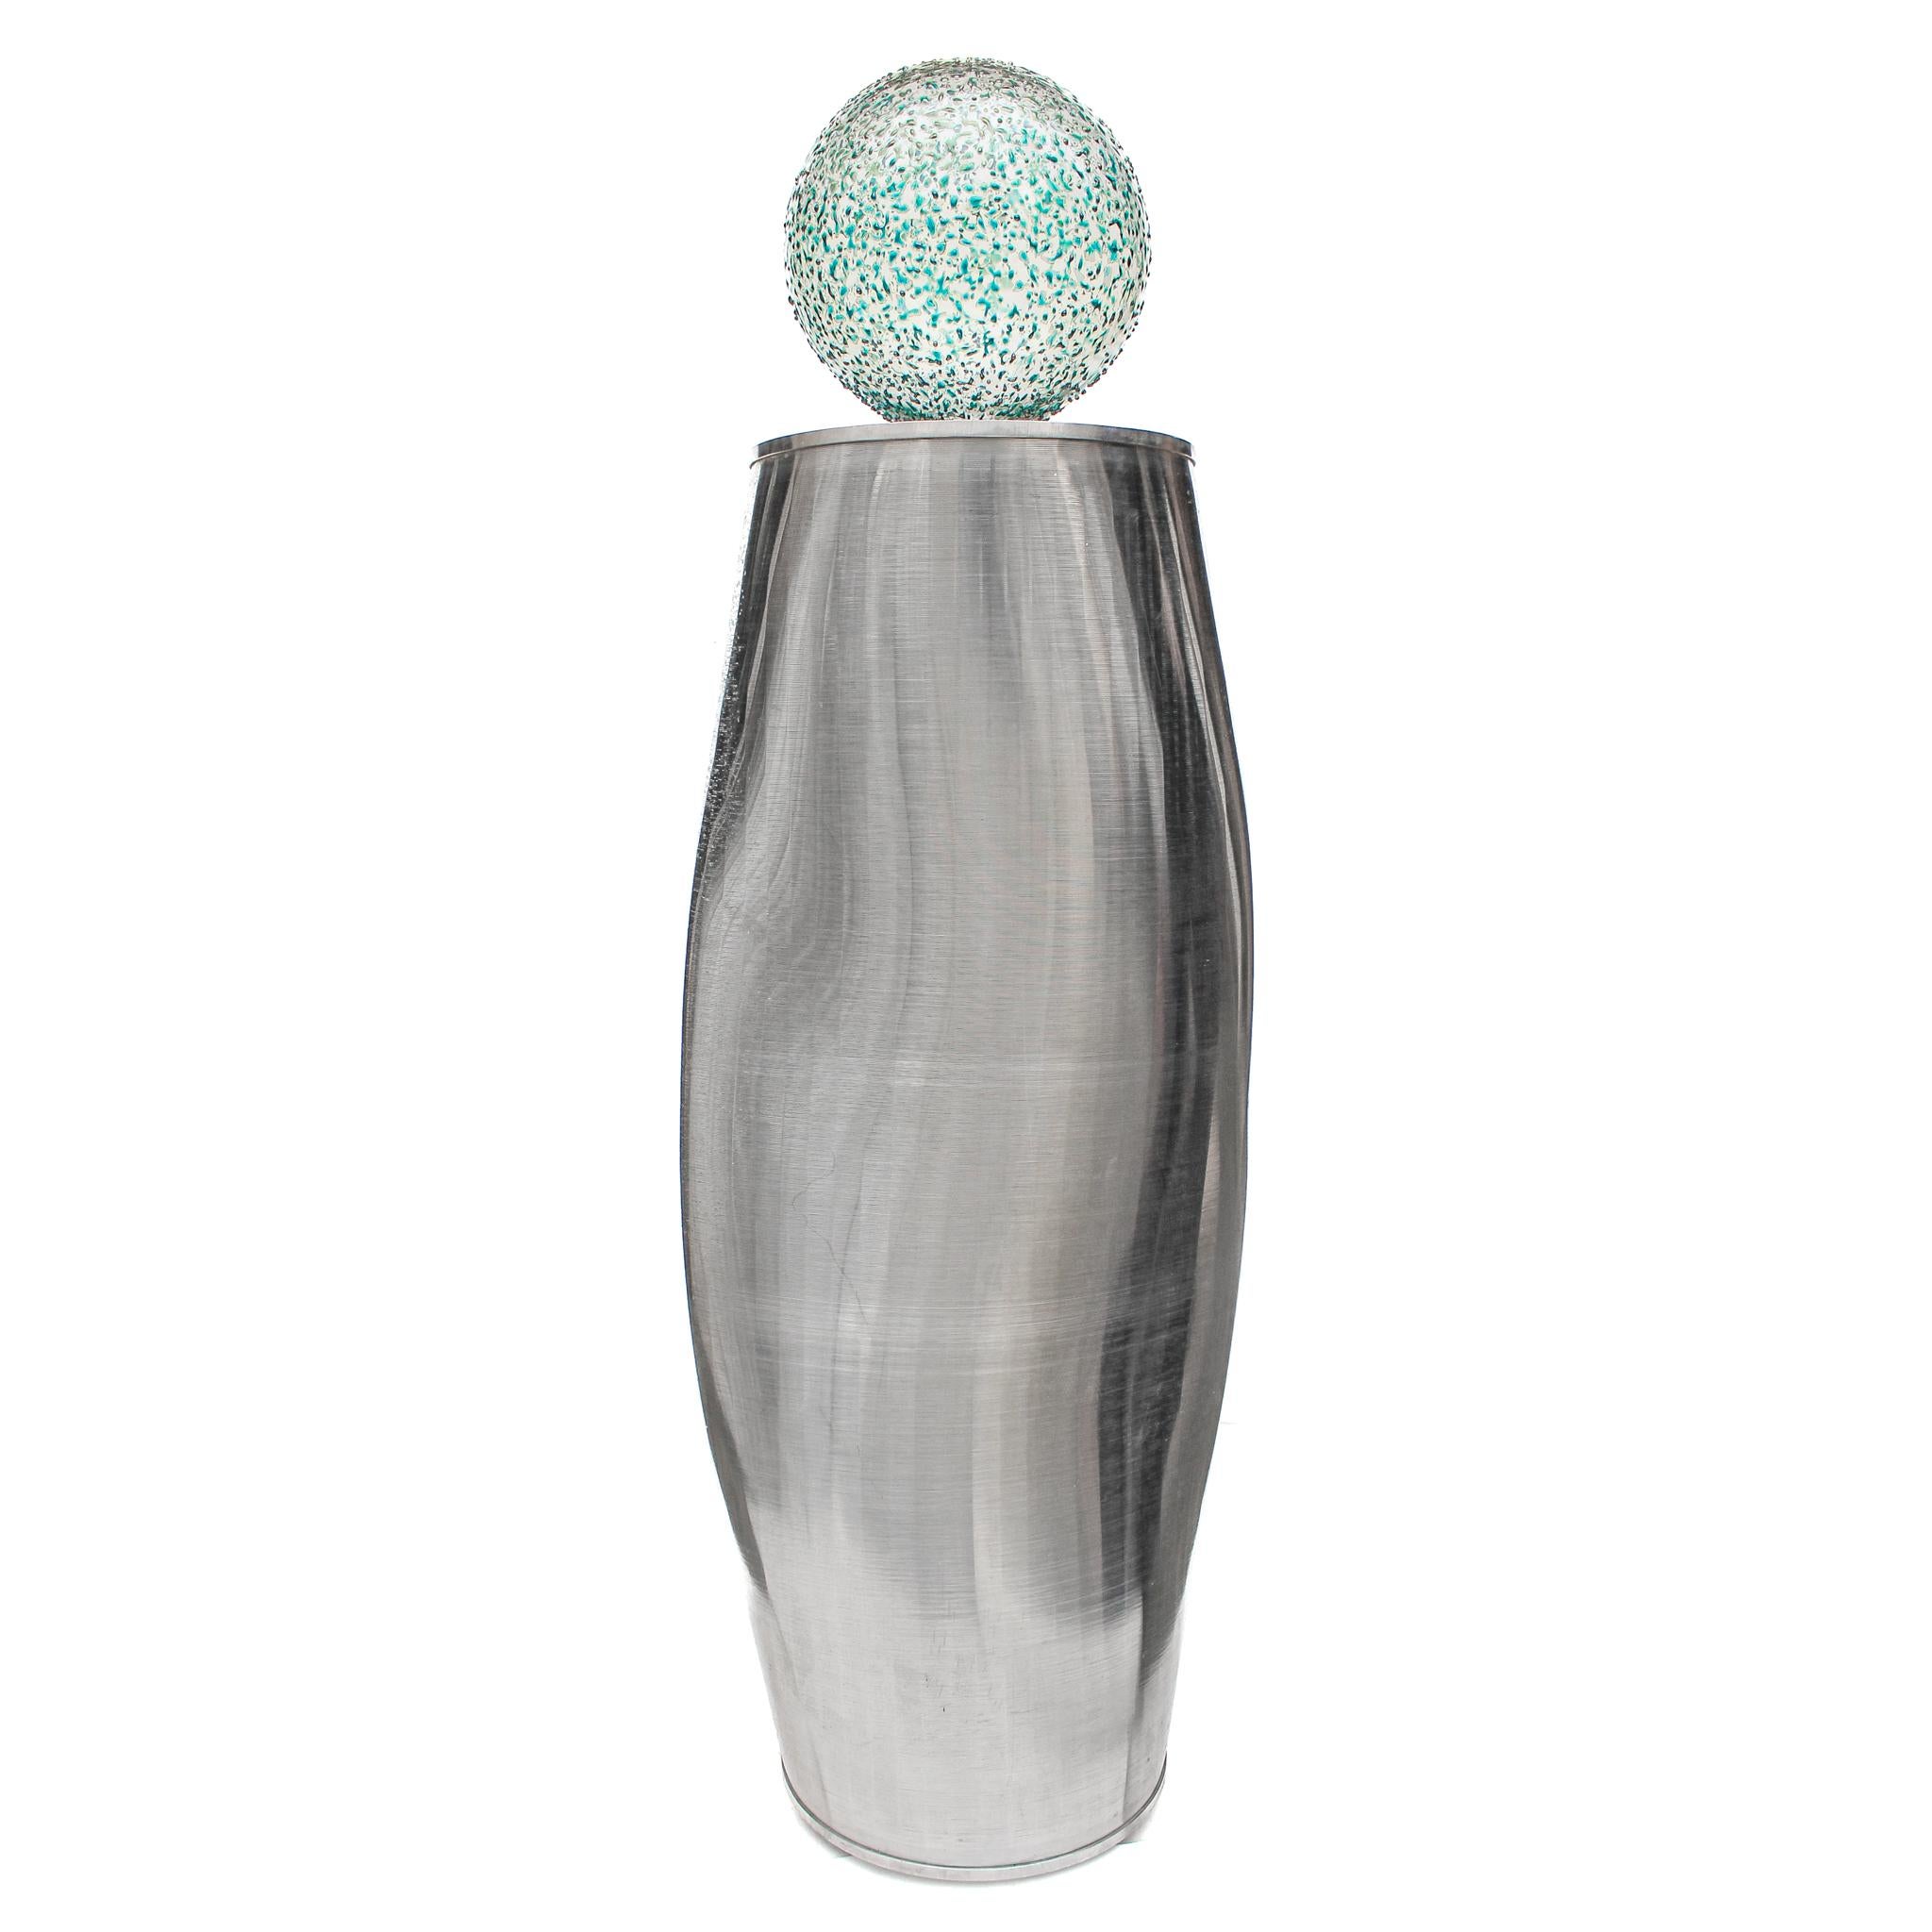 American Sculptural Industrial Aluminium Silver Filter with a Hand-Blown Glass Ball Top For Sale